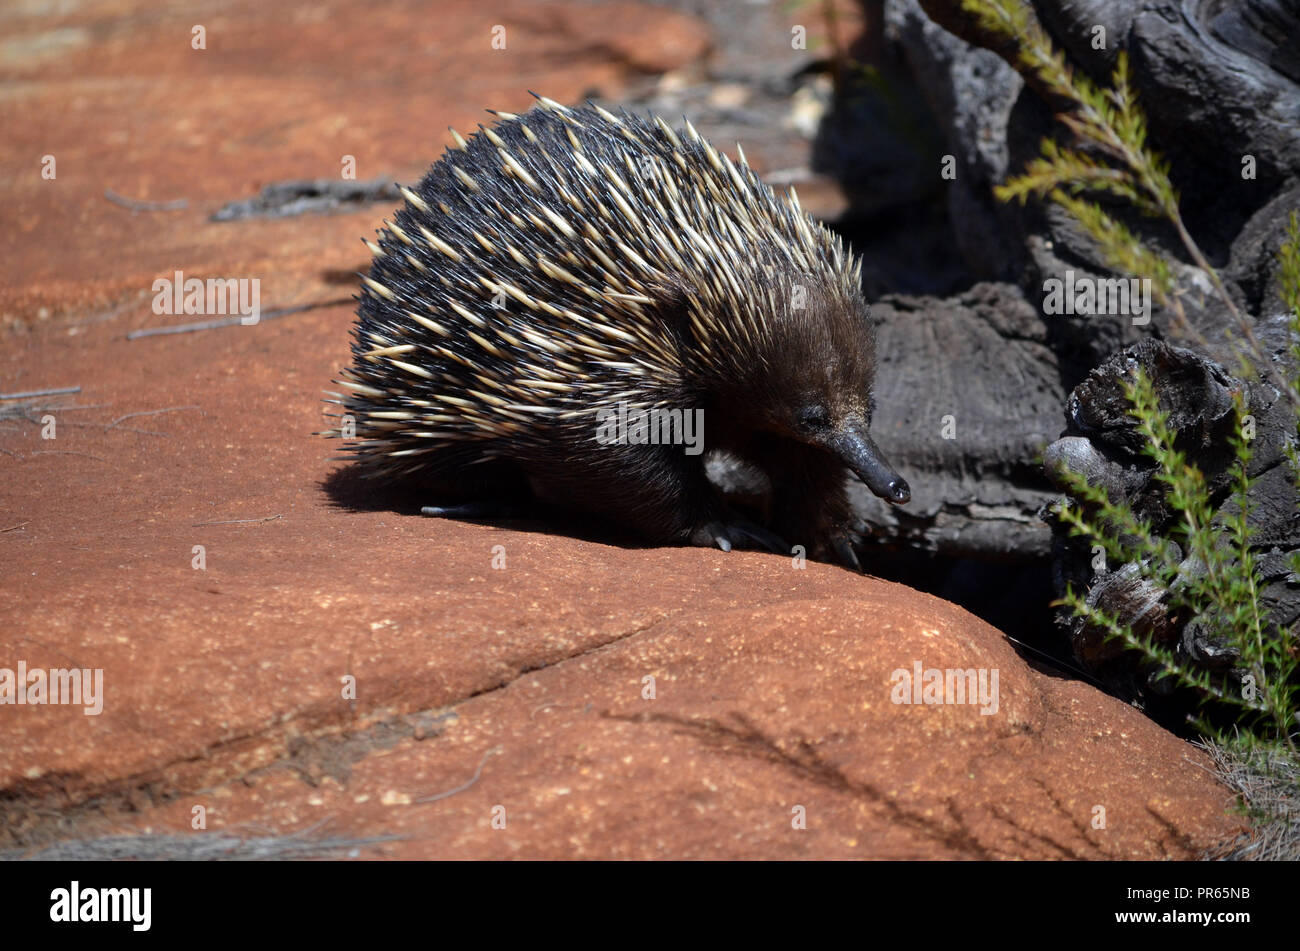 Australian echidna, the spiny anteater, Tachyglossus aculeatus, searching  for ants on sandstone rocks, Royal National Park, Sydney, NSW, Australia  Stock Photo - Alamy